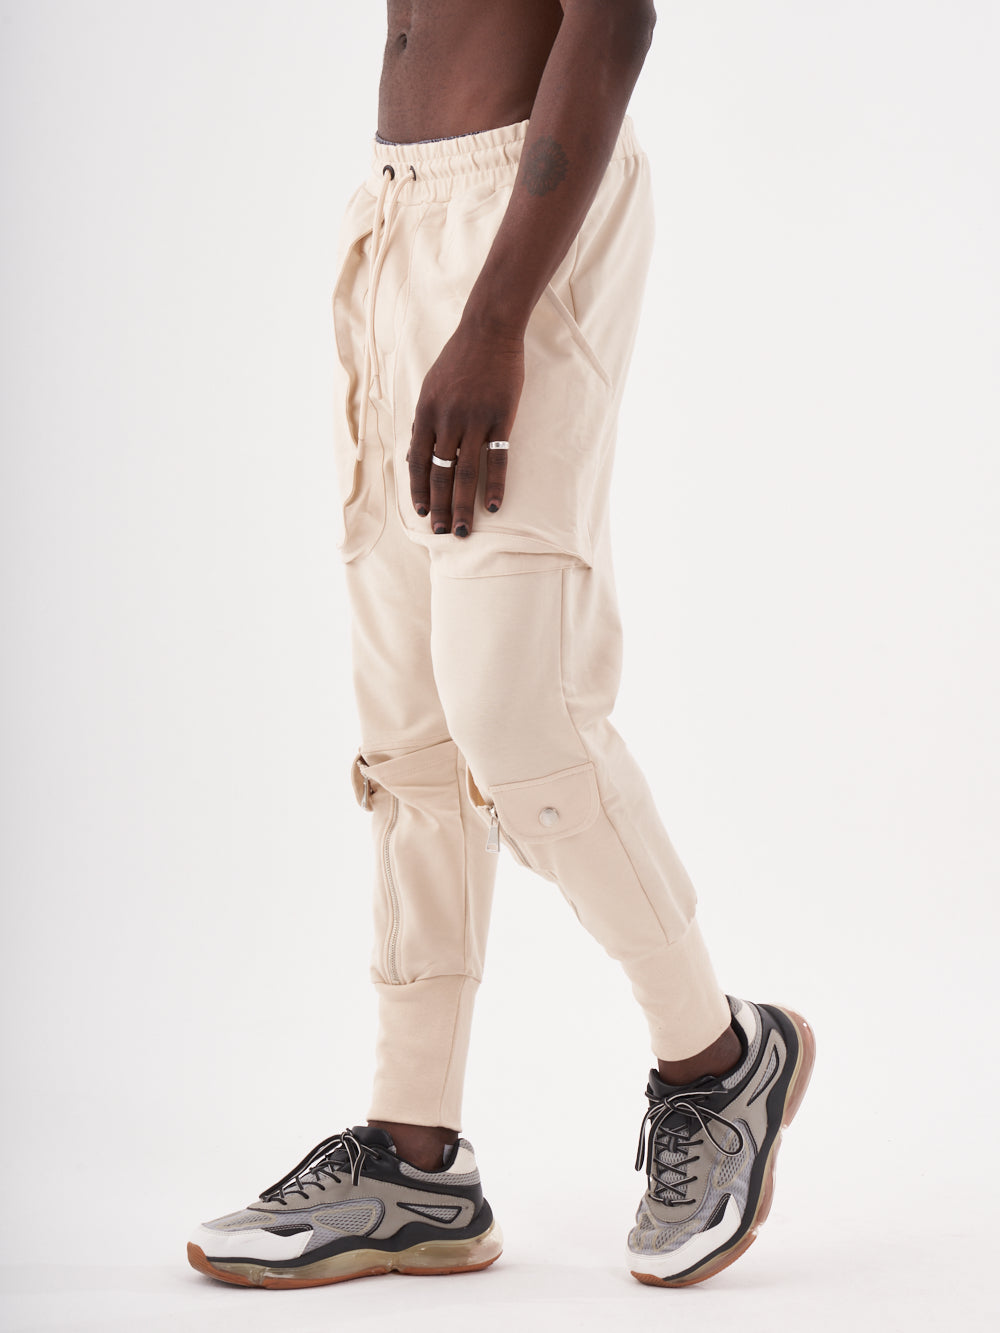 A man wearing GUERRILLA | BEIGE sweatpants and sneakers.